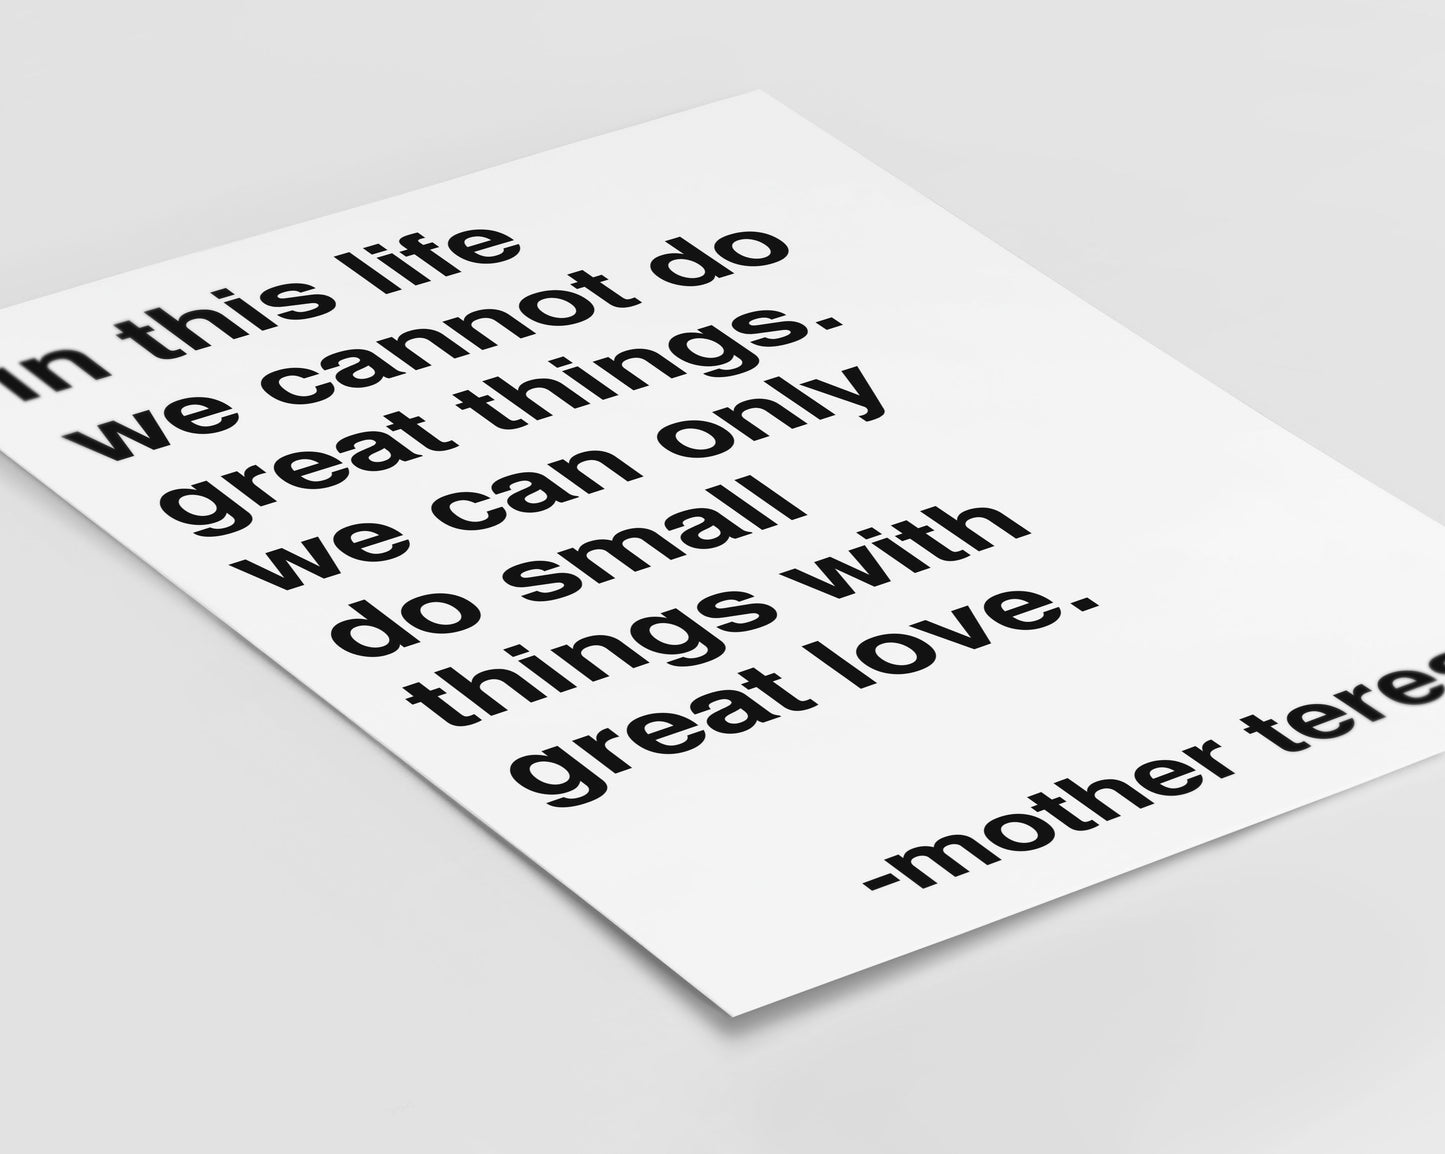 Small Things Mother Teresa Statement White Print